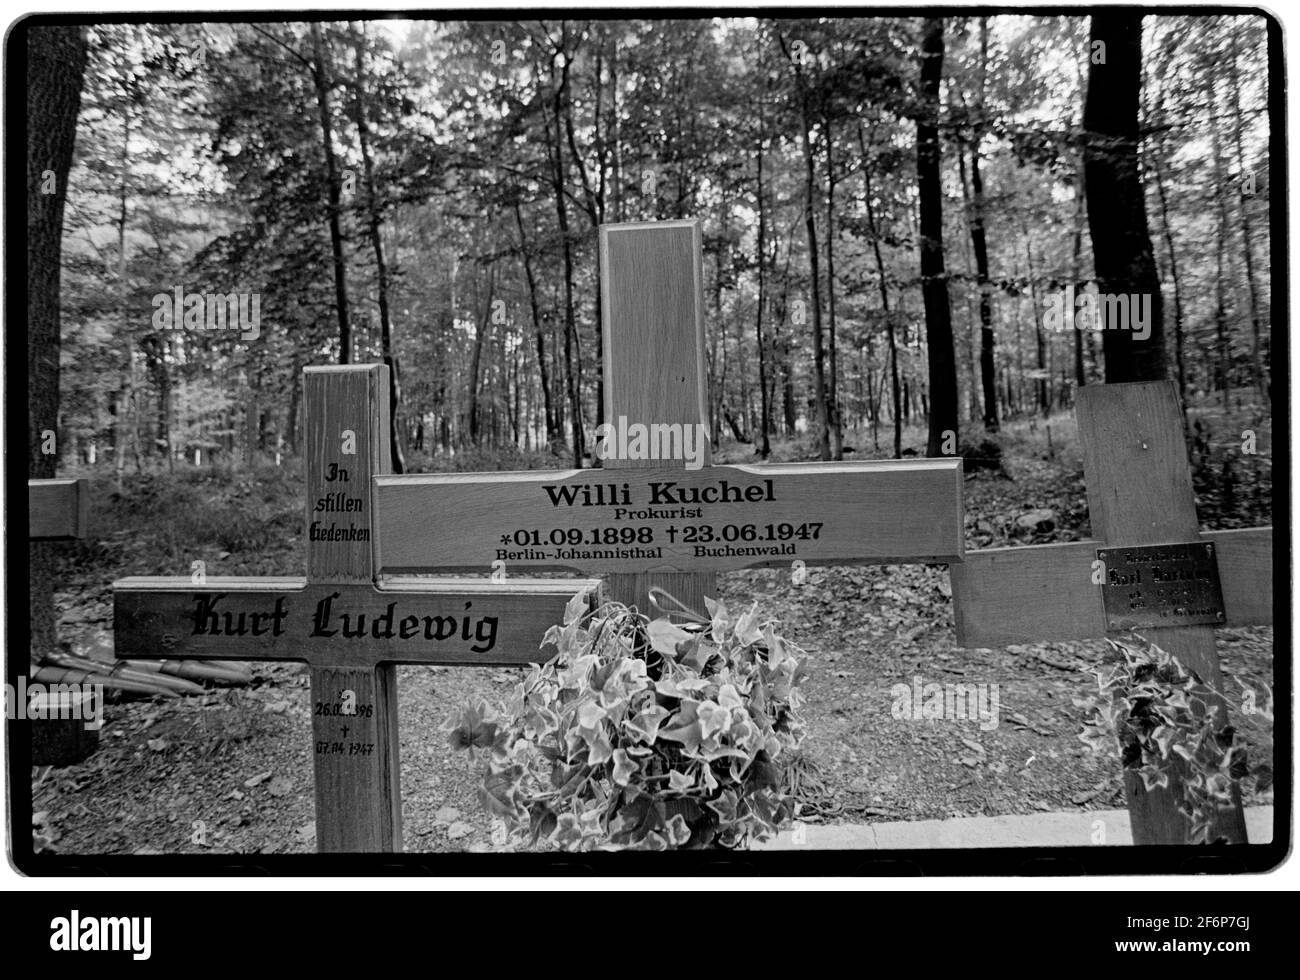 Buchenwald Concentration Camp Weimar in Thuringia Germany 1994 In late 1989 after the fall of ‘The Wall’ graves revealled the remains of former Nazis imprissoned in Soviet Special Camp Number 2. Between 1990 and 1994 these graves were marked by metal steles and when named a cross was erected. Between 1945 and February 10, 1950, the camp was administered by the Soviet Union and served as Special Camp No. 2 of the NKVD.[1] It was part of a 'special camps' network operating since 1945, formally integrated into the Gulag in 1948 Stock Photo